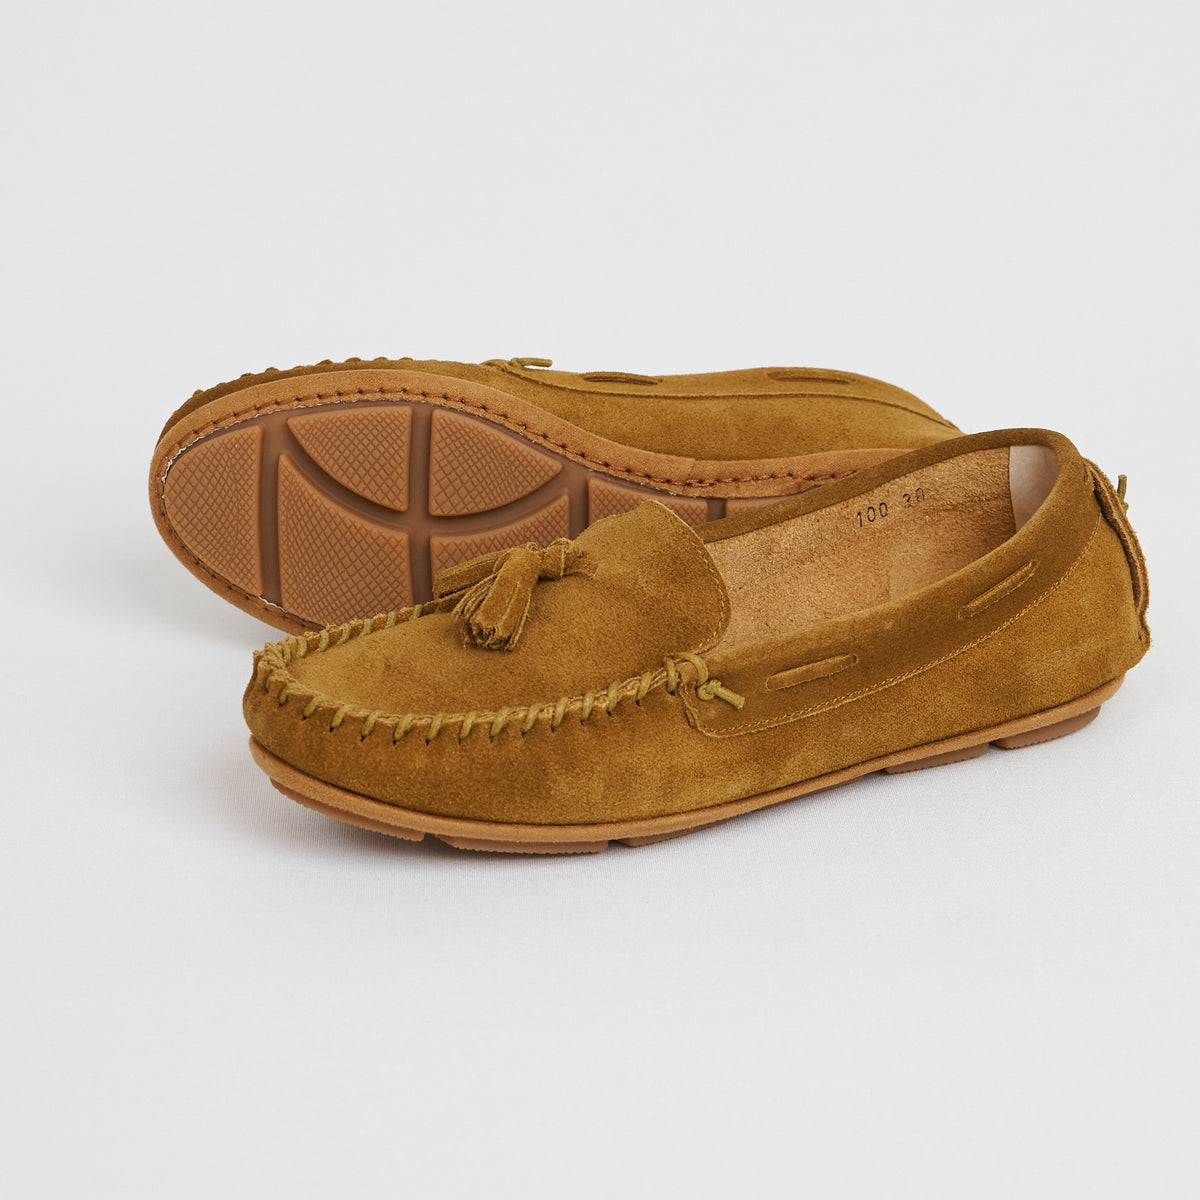 DeeCee style Ladies Hand Made Moccassins